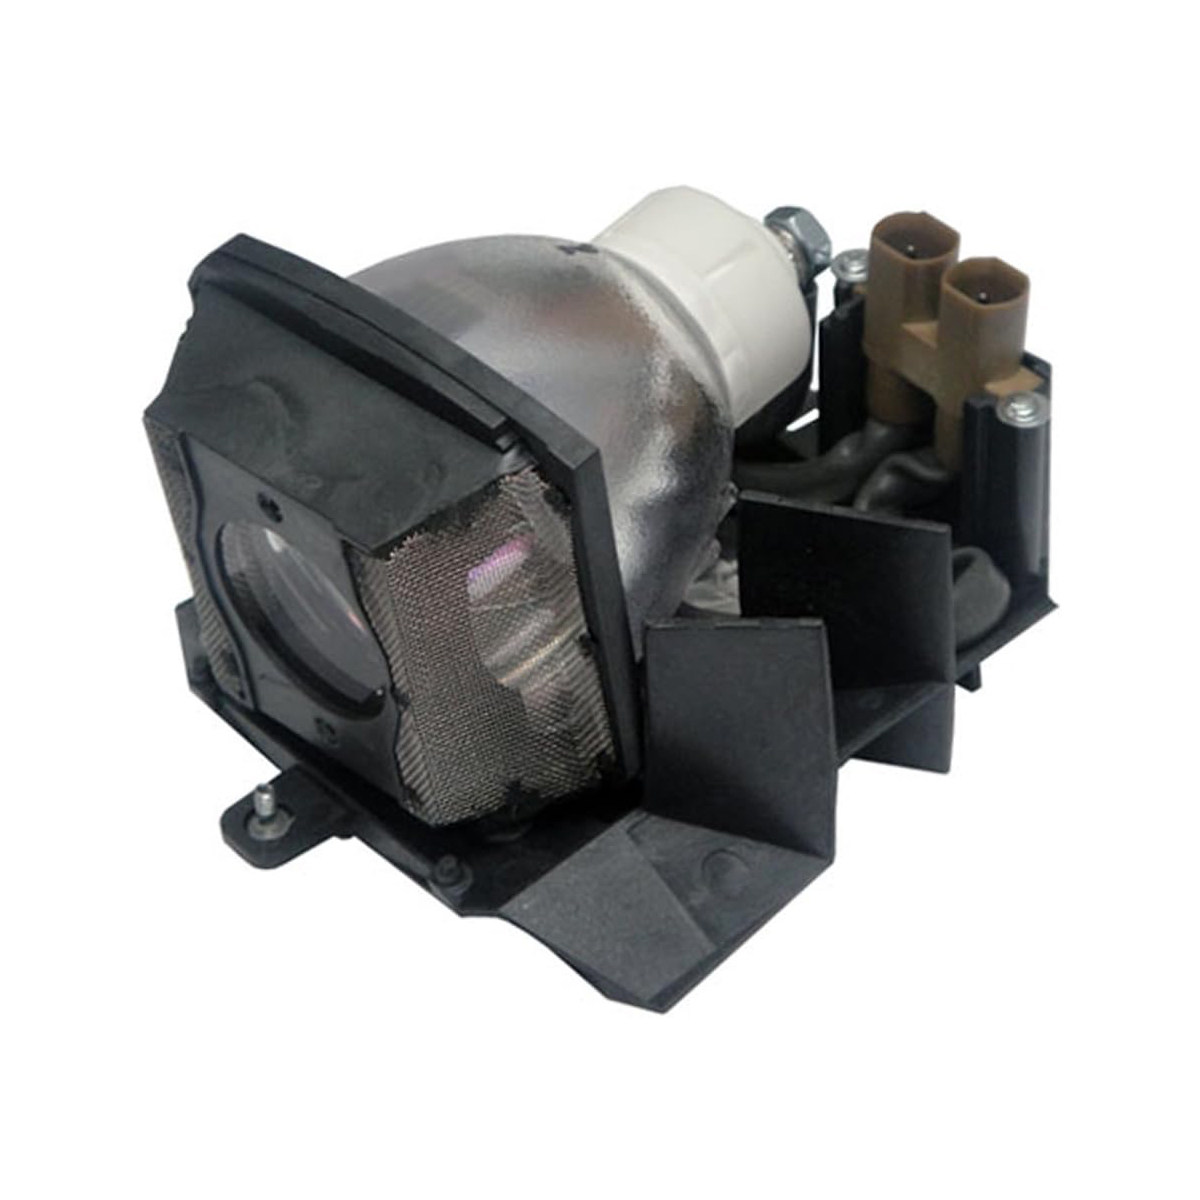 Replacement Projector lamp U5-200/28-050 For PLUS U5-200